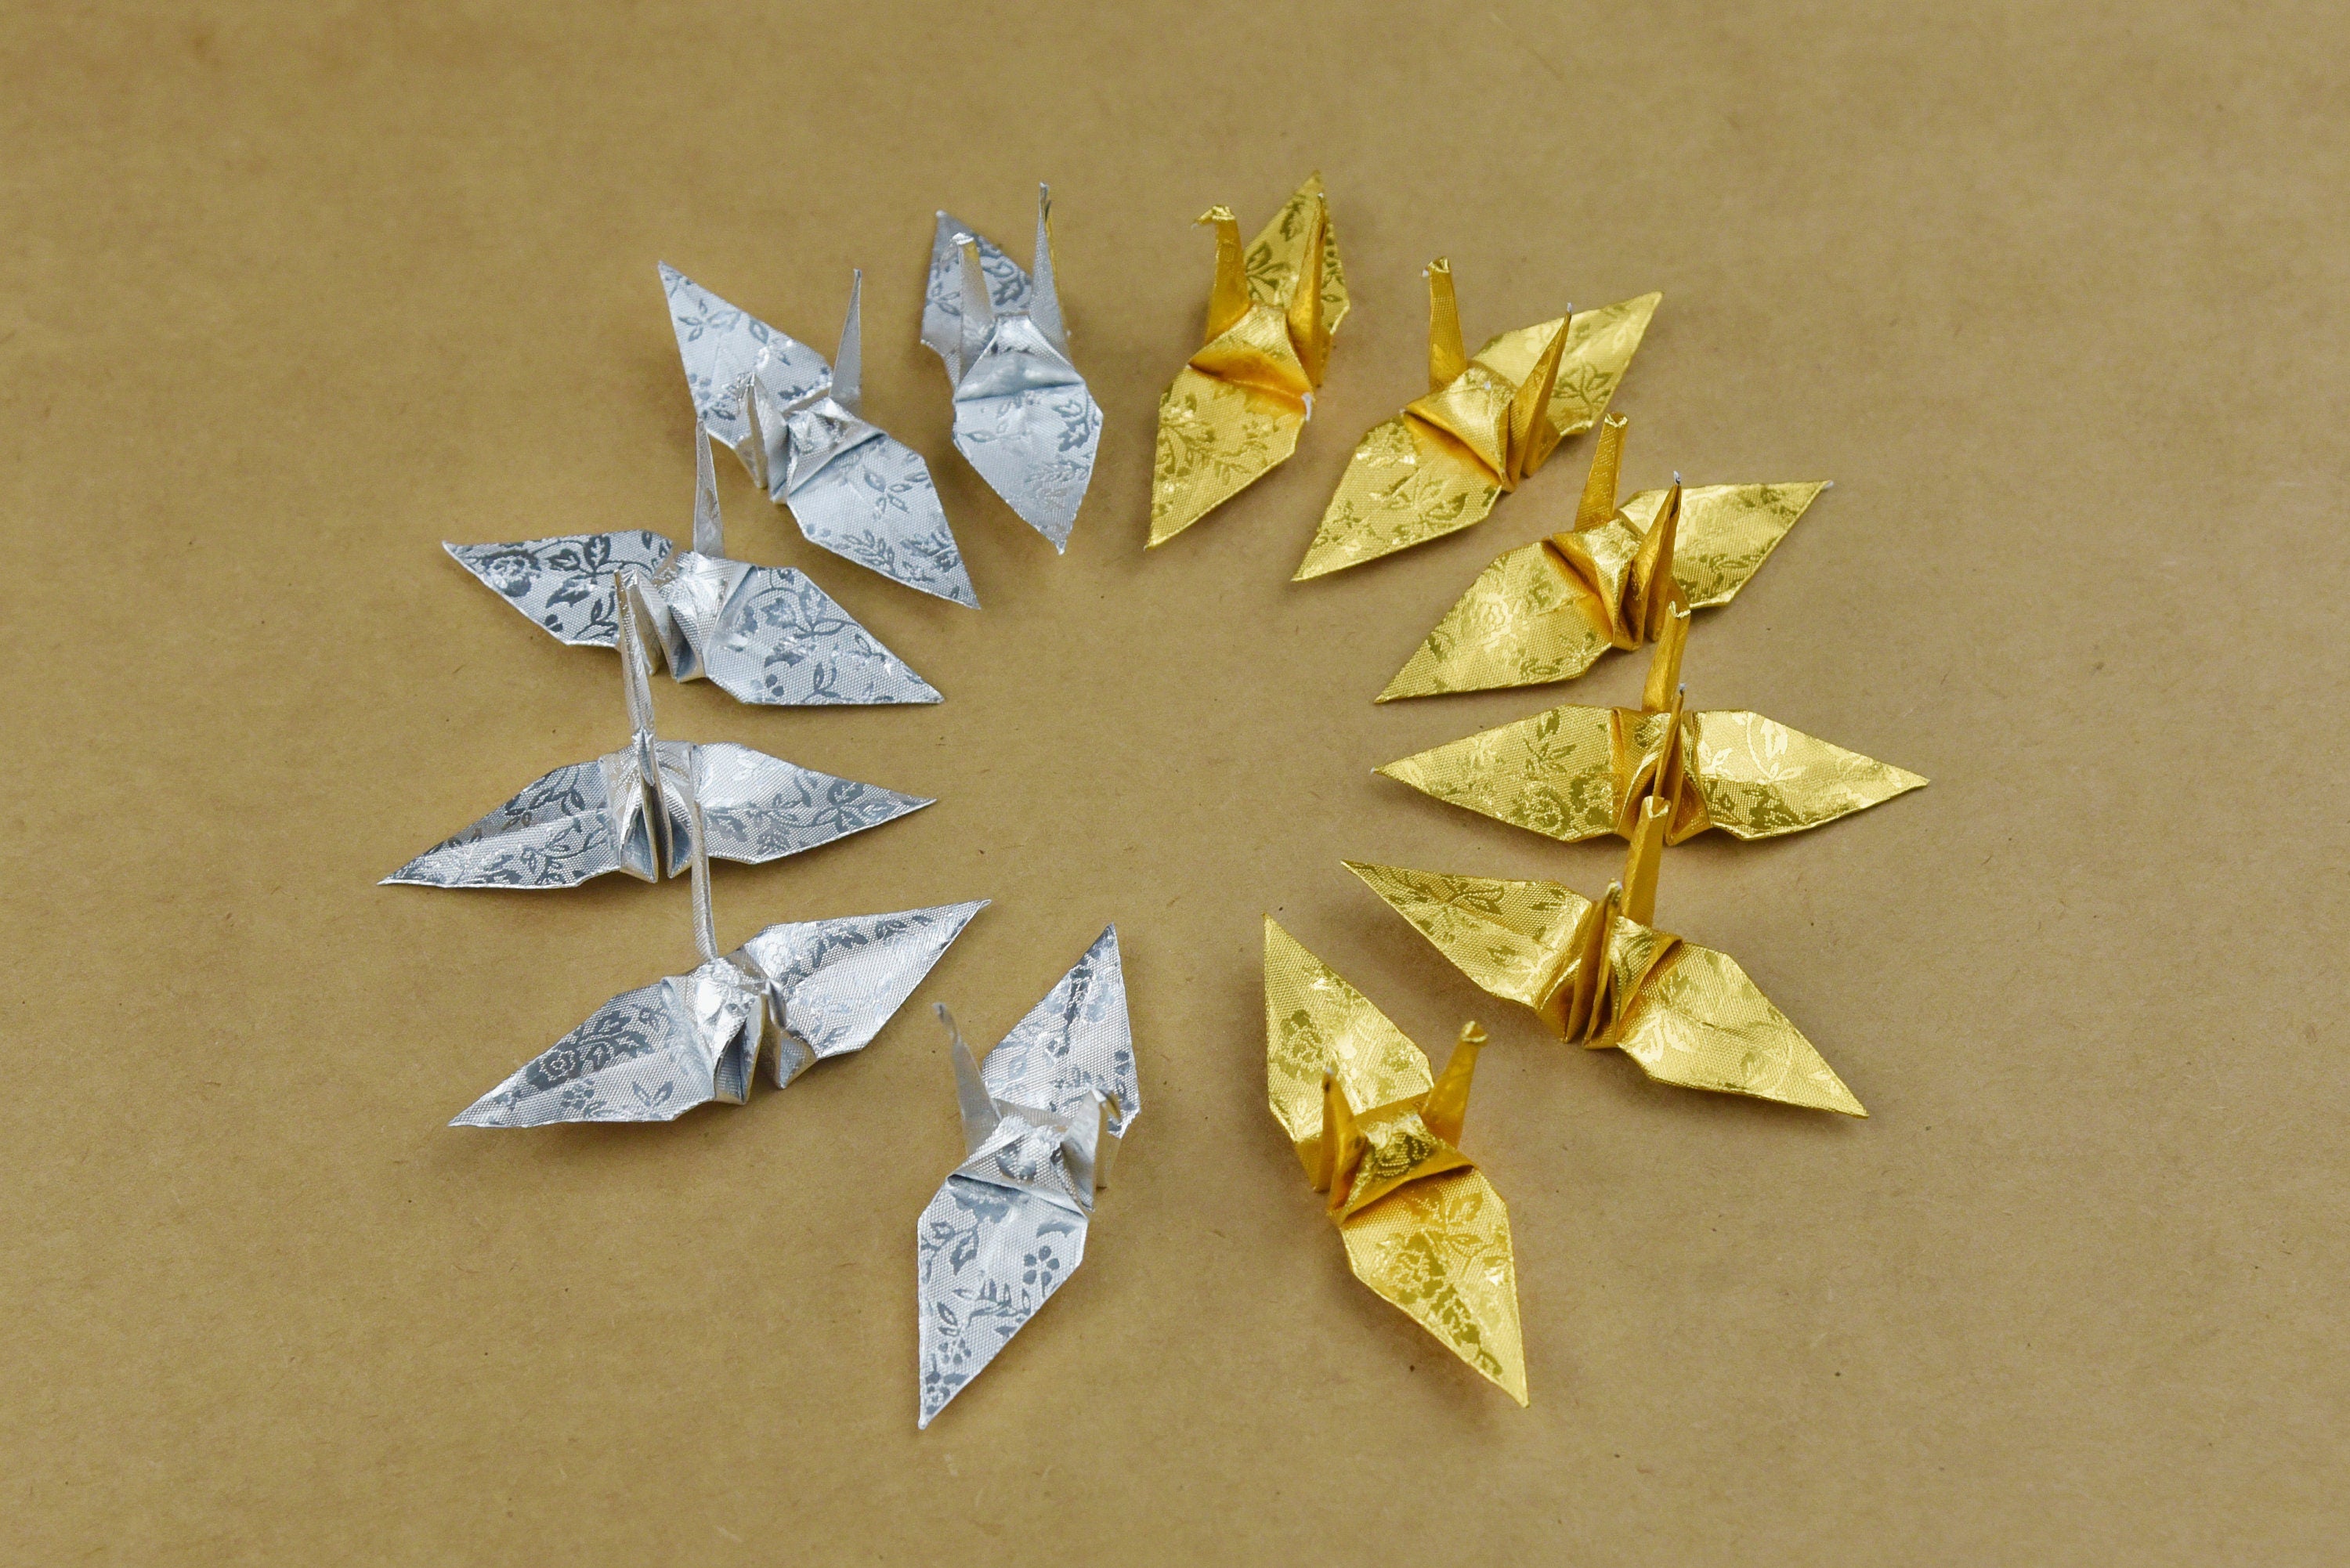 100 Origami Paper Crane Gold Silver with Rose Pattern Small 1.5 inch for Ornament, Wedding Gift, Decoration